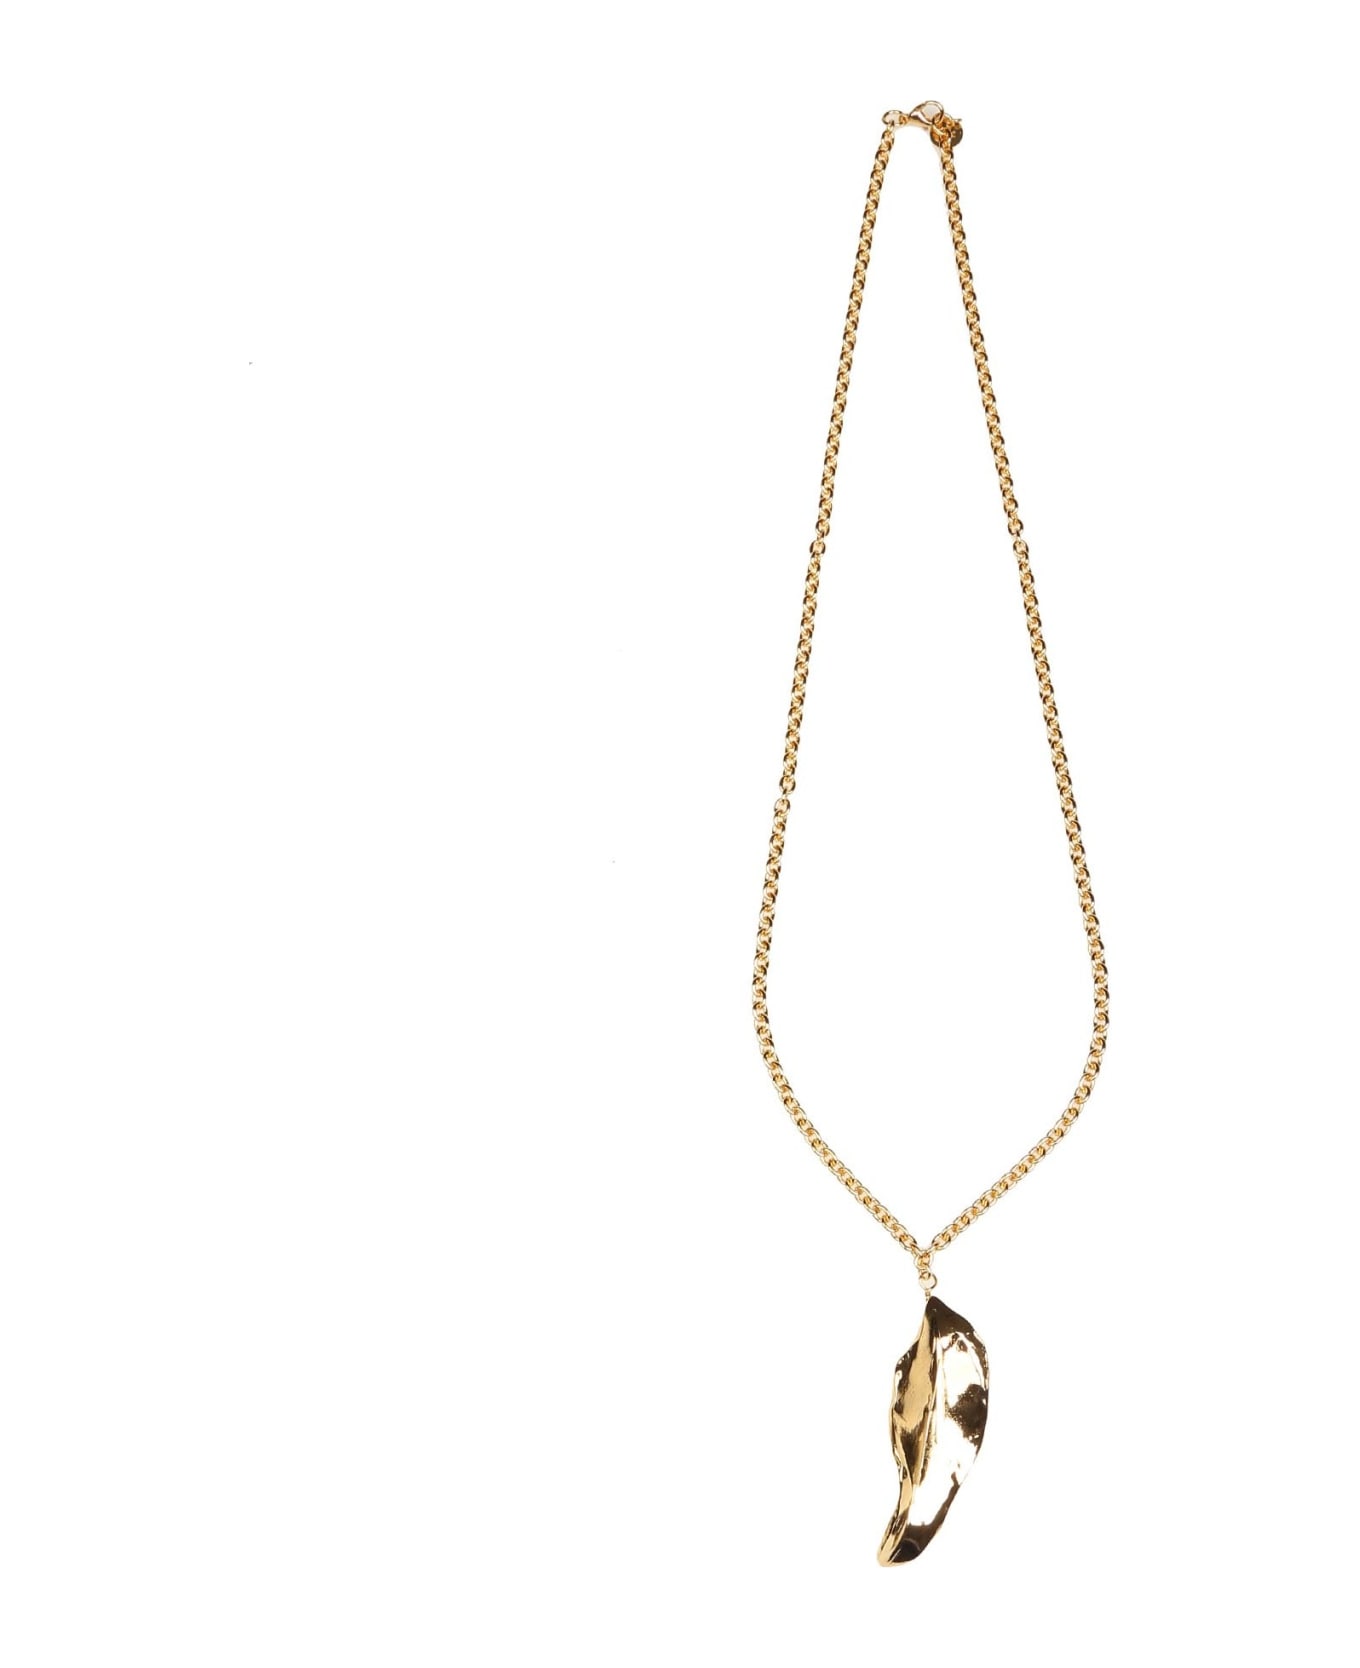 Marni Gold Metal Necklace With Leaf Pendant - Gold